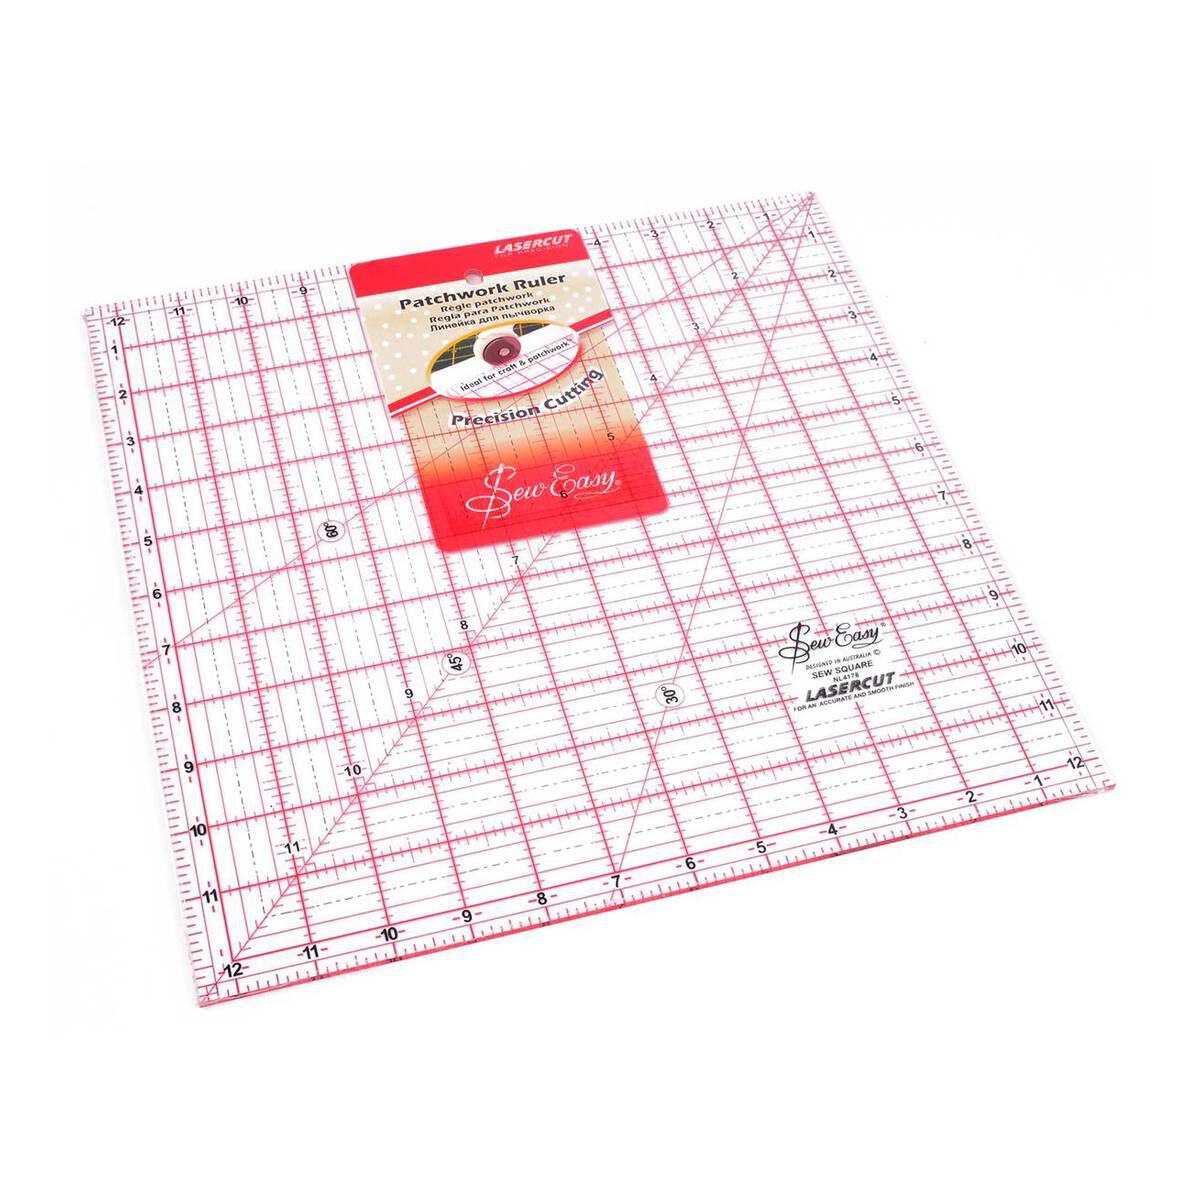 Sew Easy Square Quilting Ruler 12.5 x 12.5 Inches | Hobbycraft